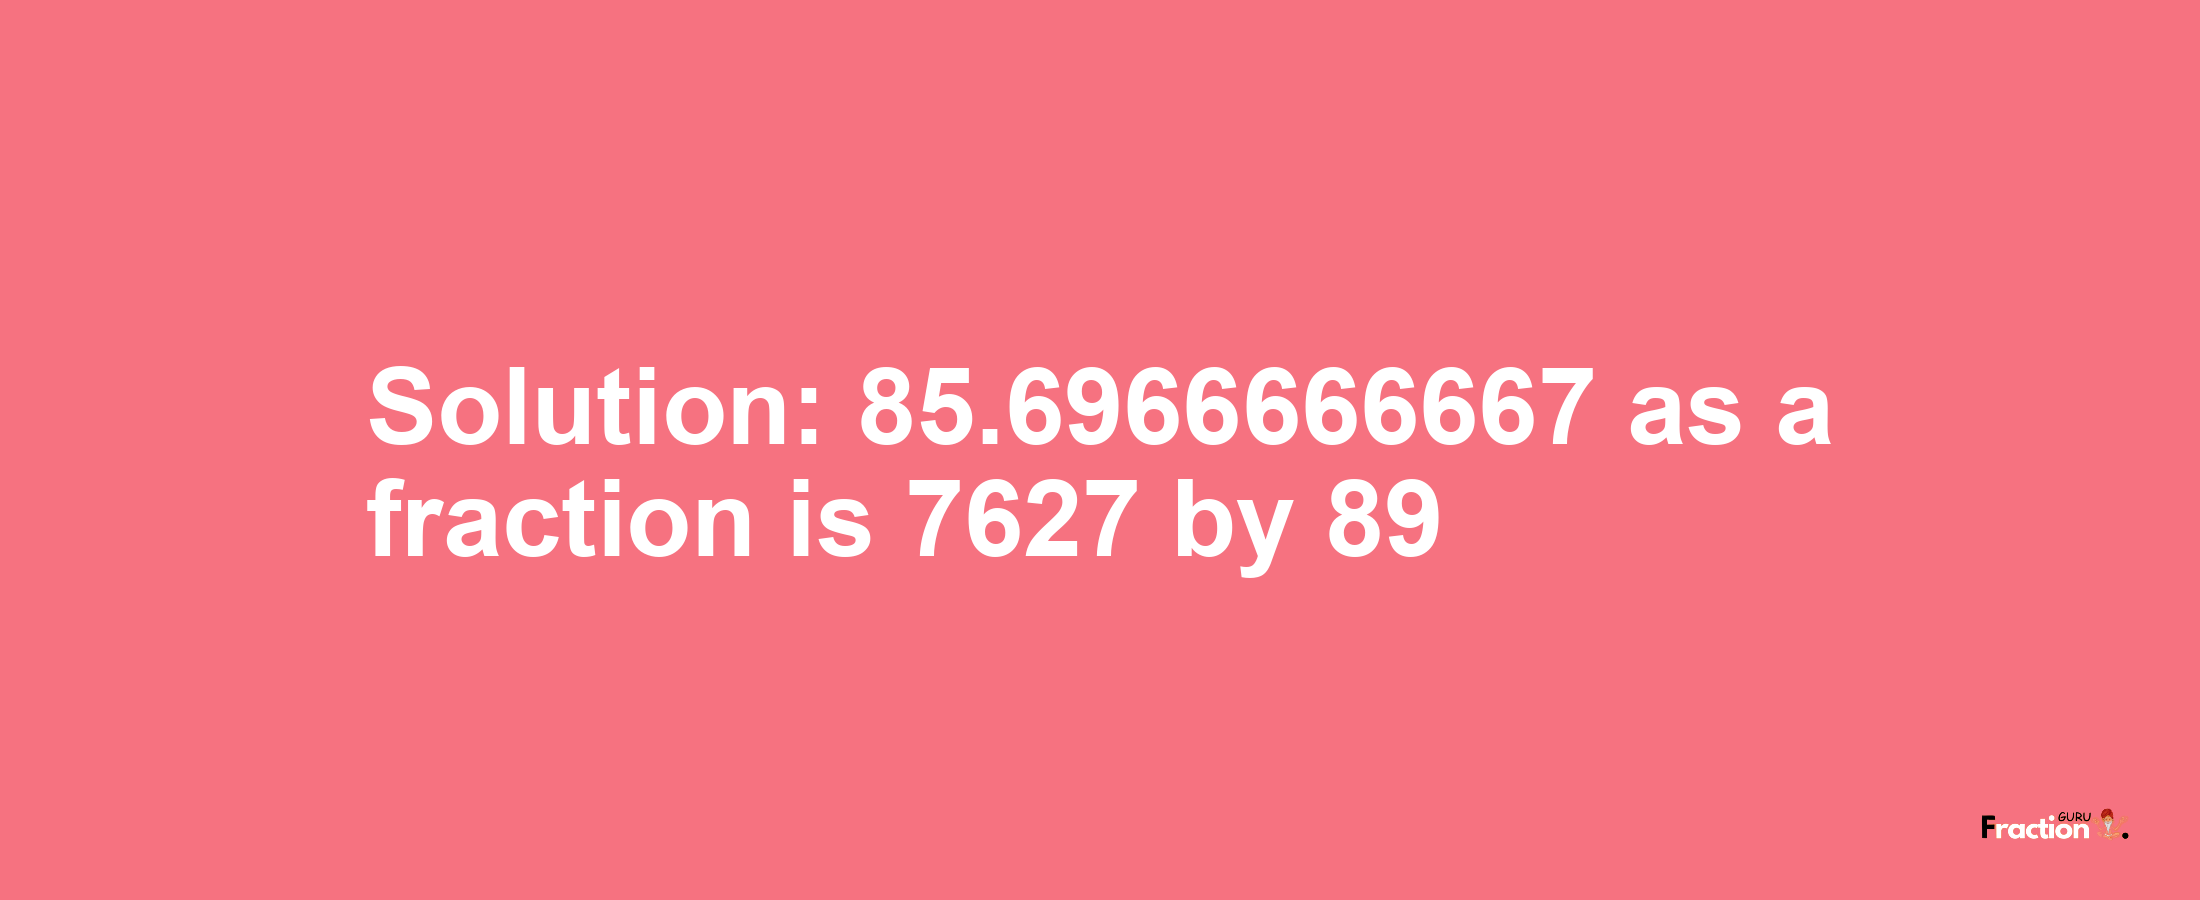 Solution:85.6966666667 as a fraction is 7627/89